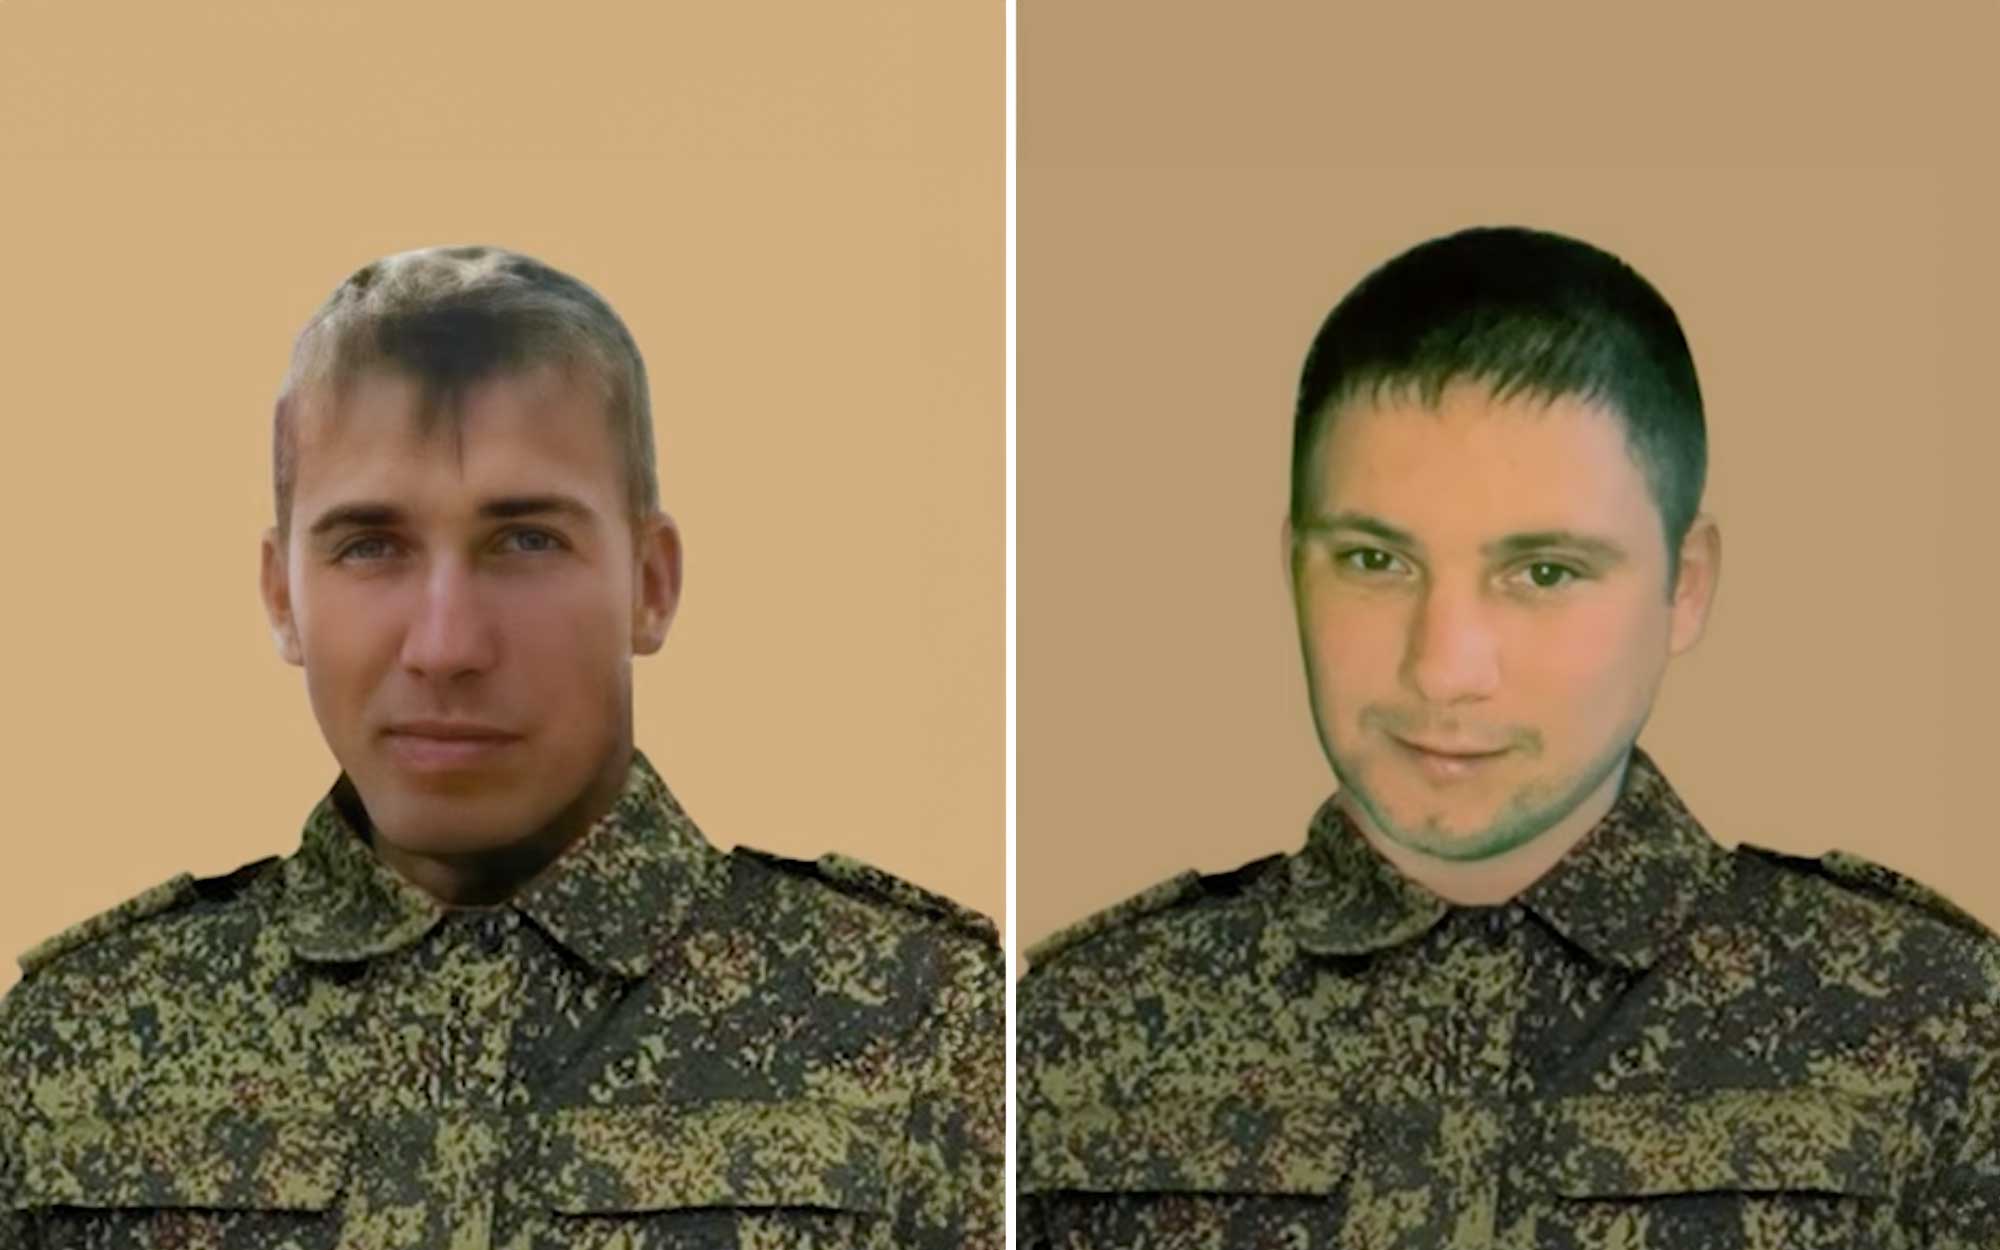 Yevgeny Chornoknizhny (left) and Vadim Shakhmatov have been indicted for a campaign of sexual violence in the Kyiv region in March 2022. © National Police of Ukraine